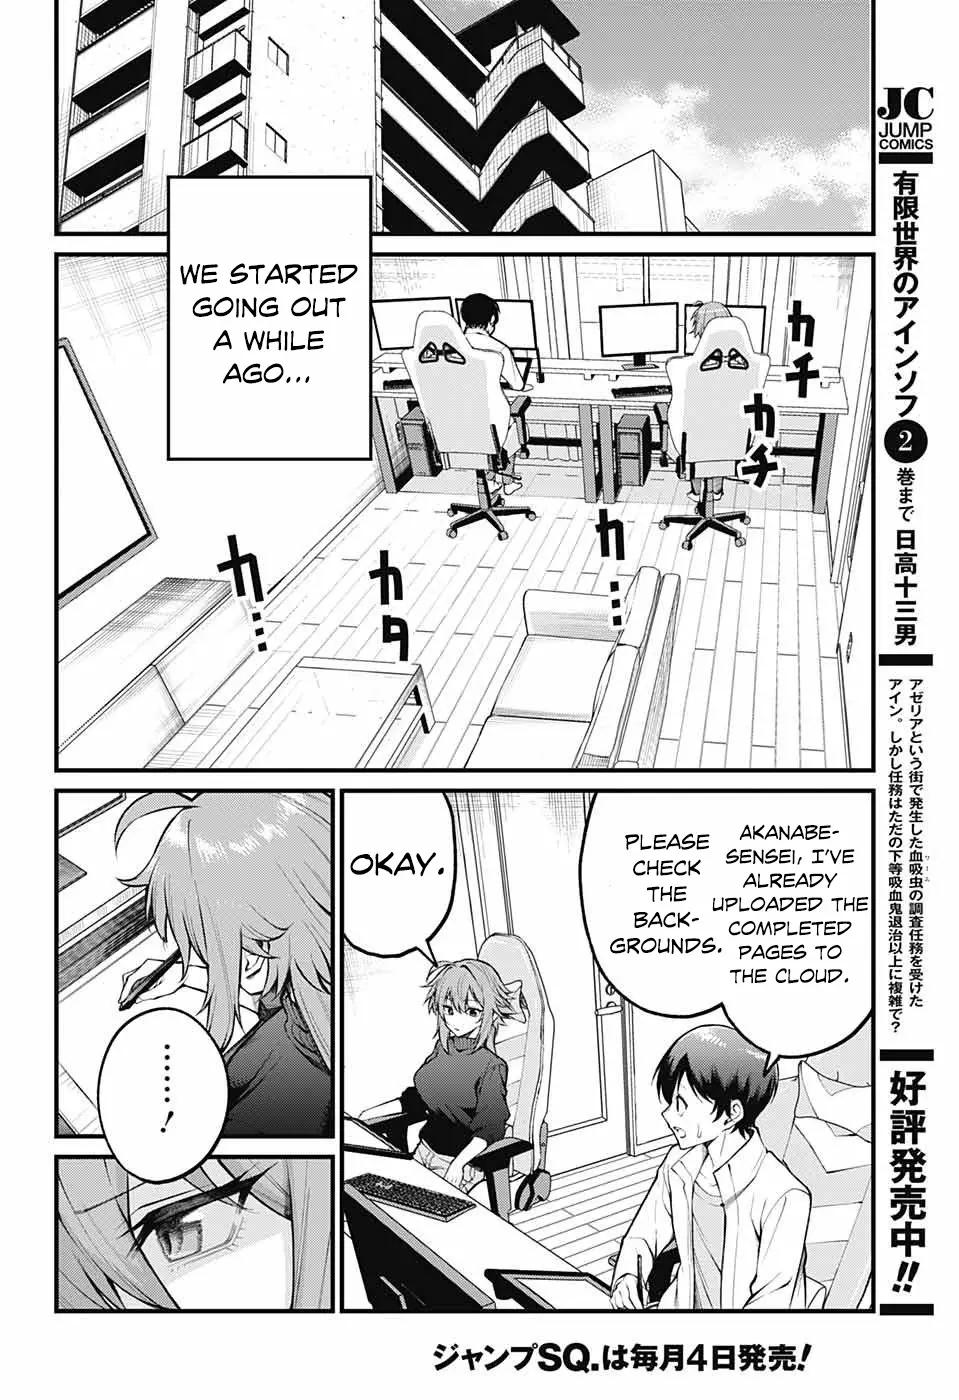 Akanabe-Sensei Doesn't Know About Embarrassment - 1 page 4-c865522e